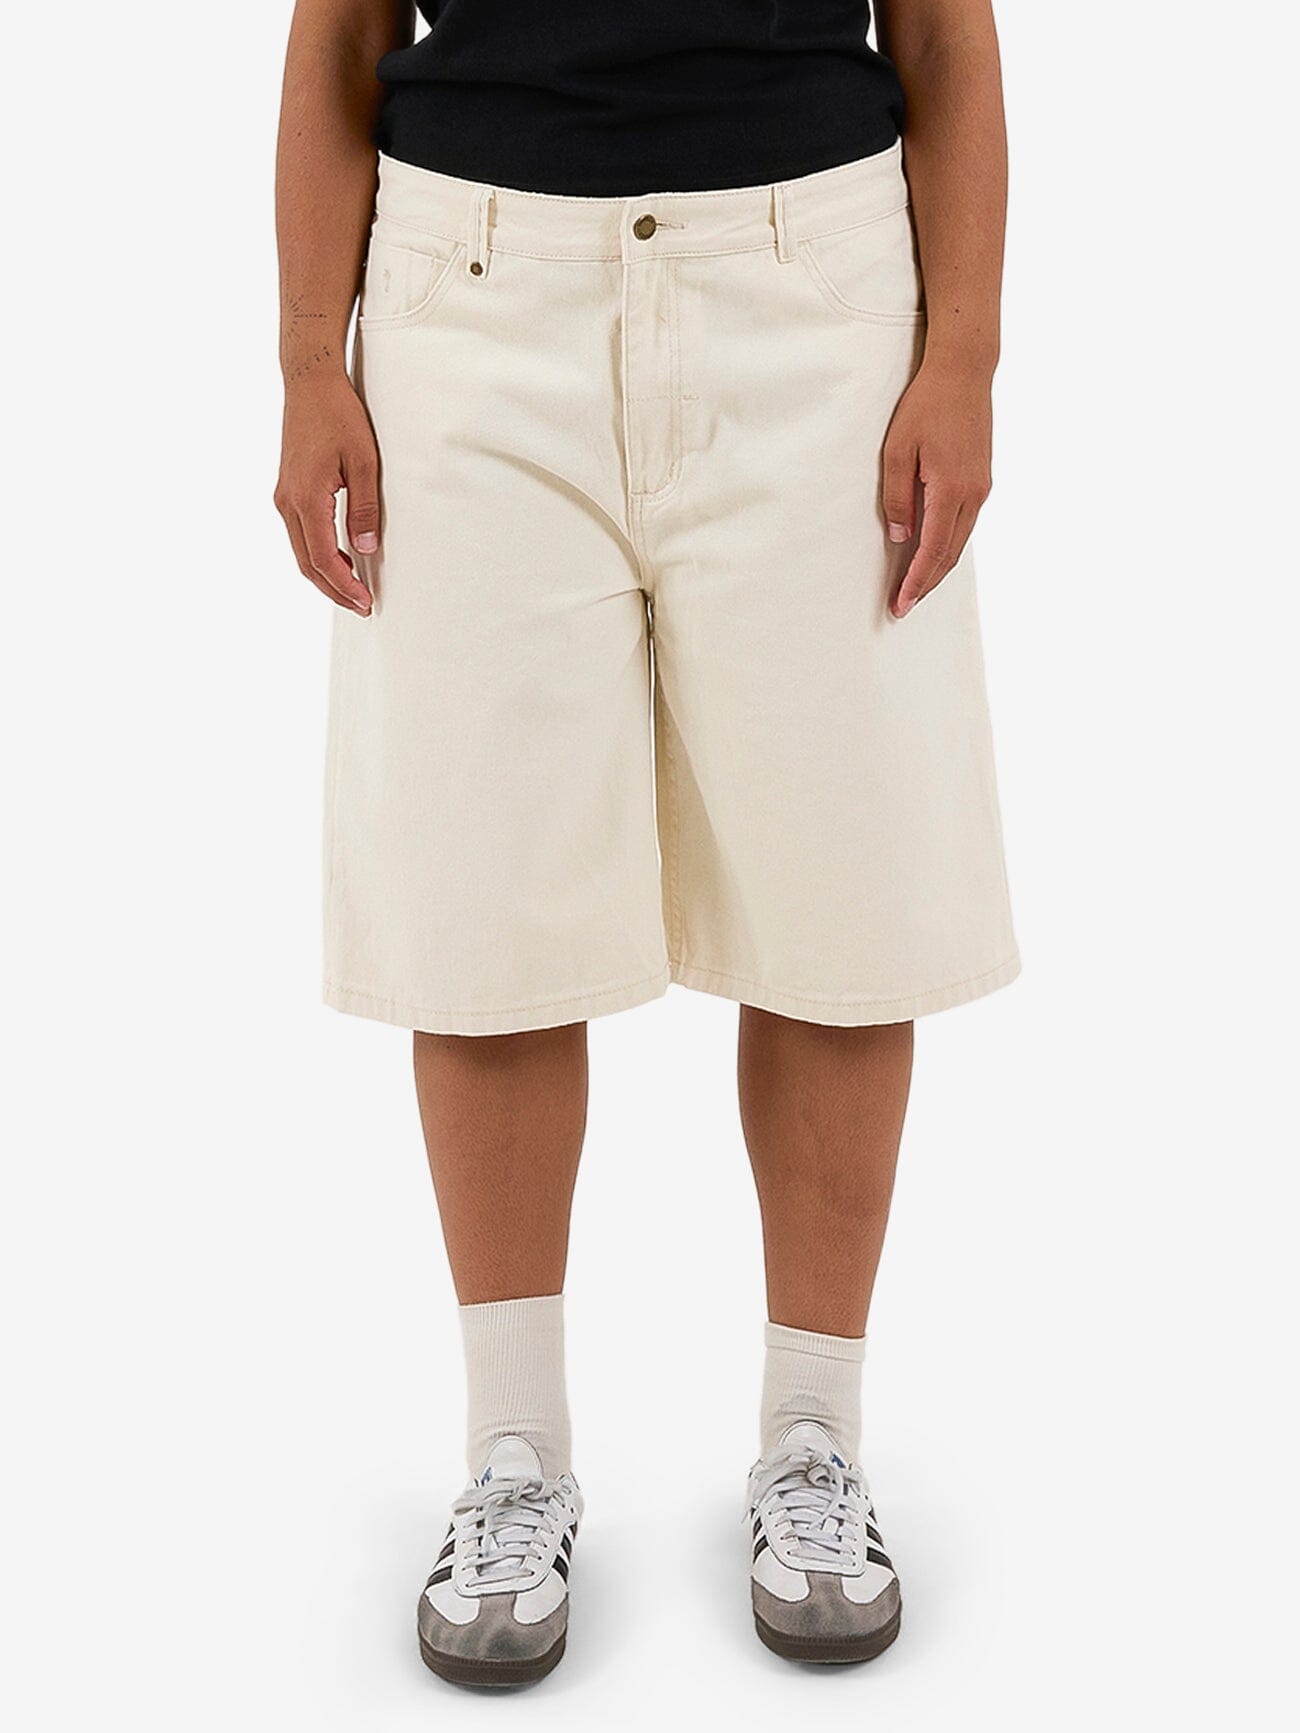 Syd Baggy Short - Heritage White